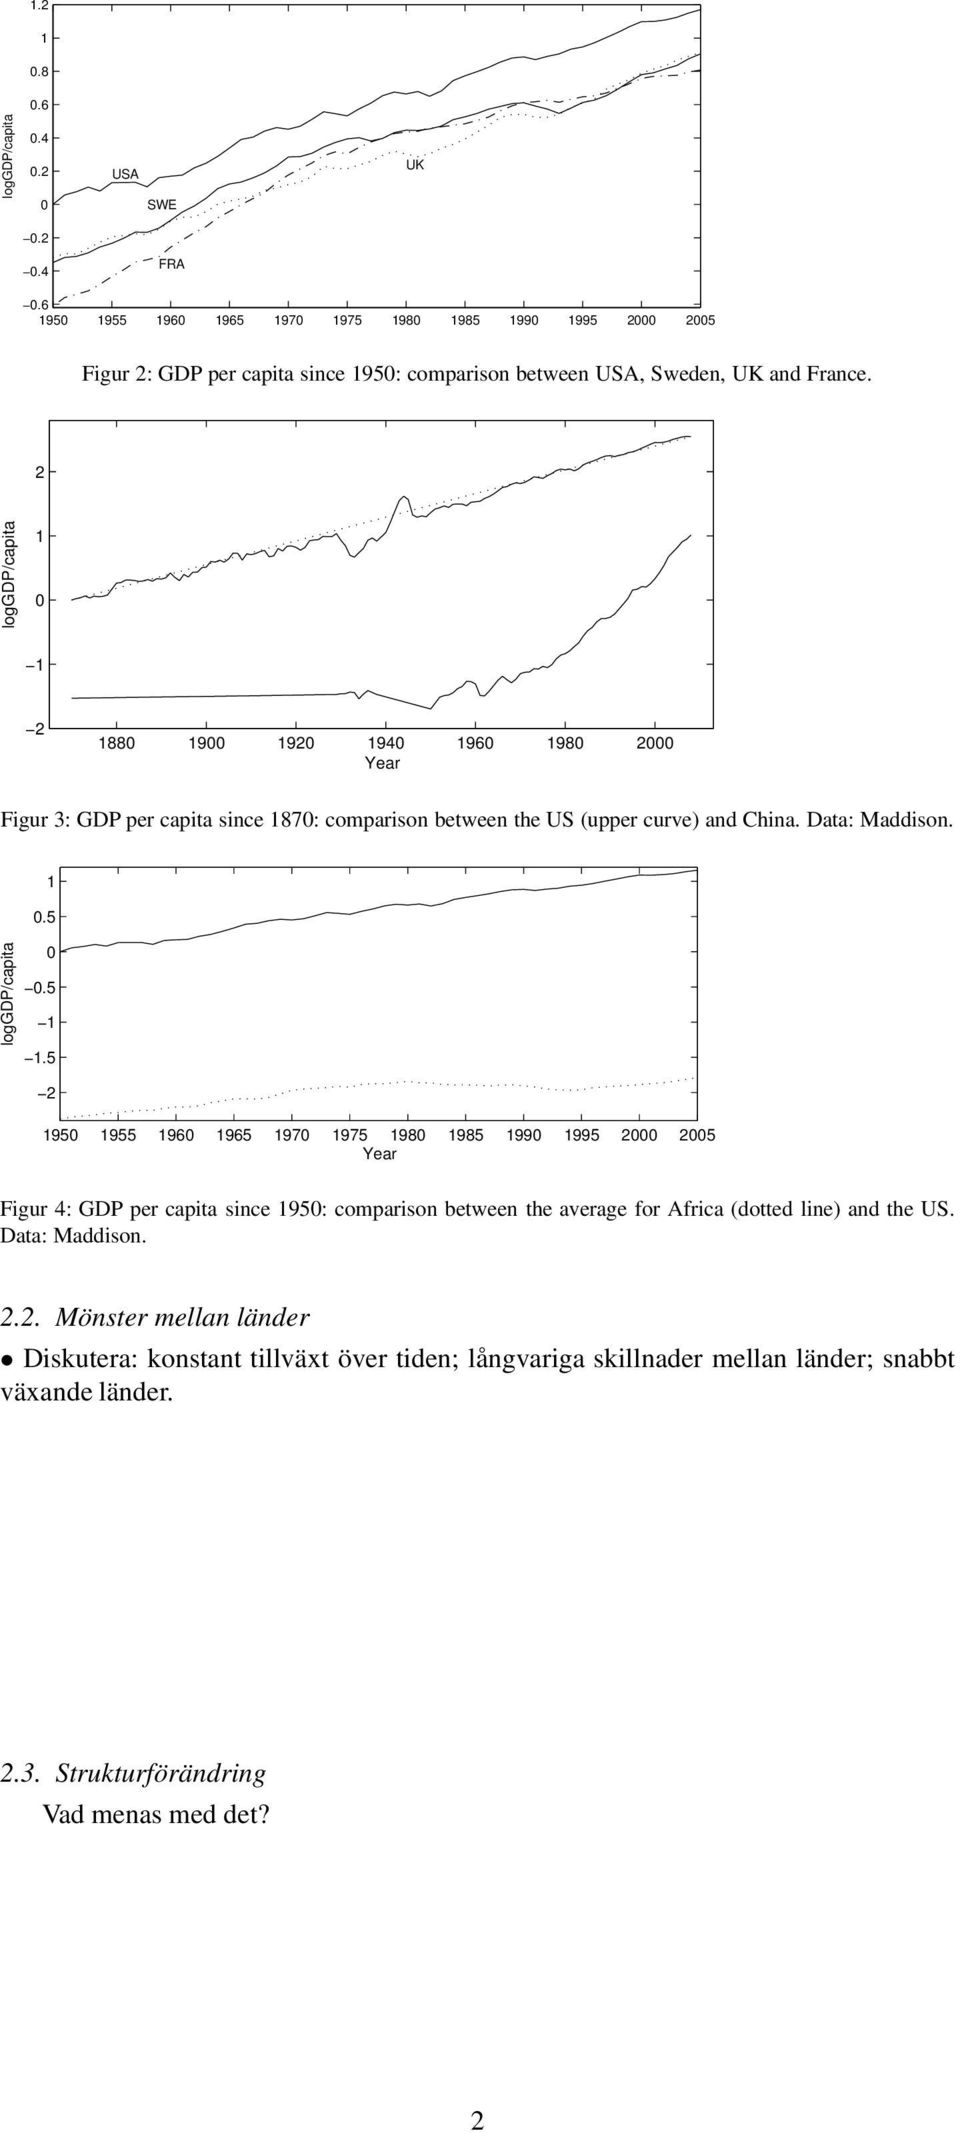 2 loggdp/capita 0 2 880 900 920 940 960 980 2000 Year Figur 3: GDP per capita since 870: comparison between the US (upper curve) and China. Data: Maddison. 0.5 